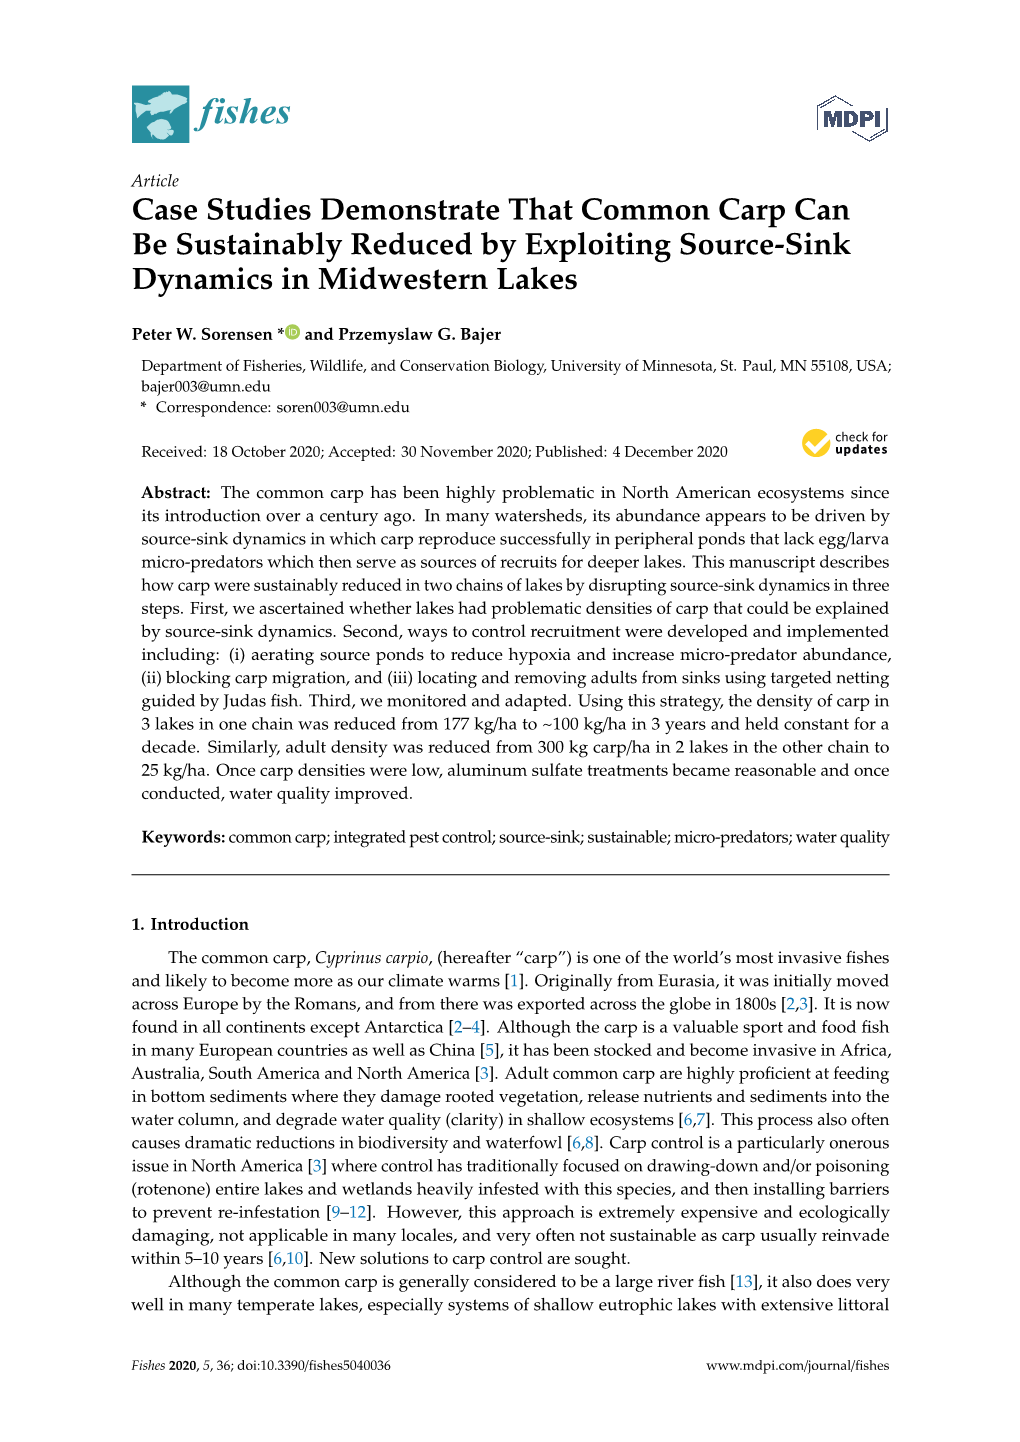 Case Studies Demonstrate That Common Carp Can Be Sustainably Reduced by Exploiting Source-Sink Dynamics in Midwestern Lakes